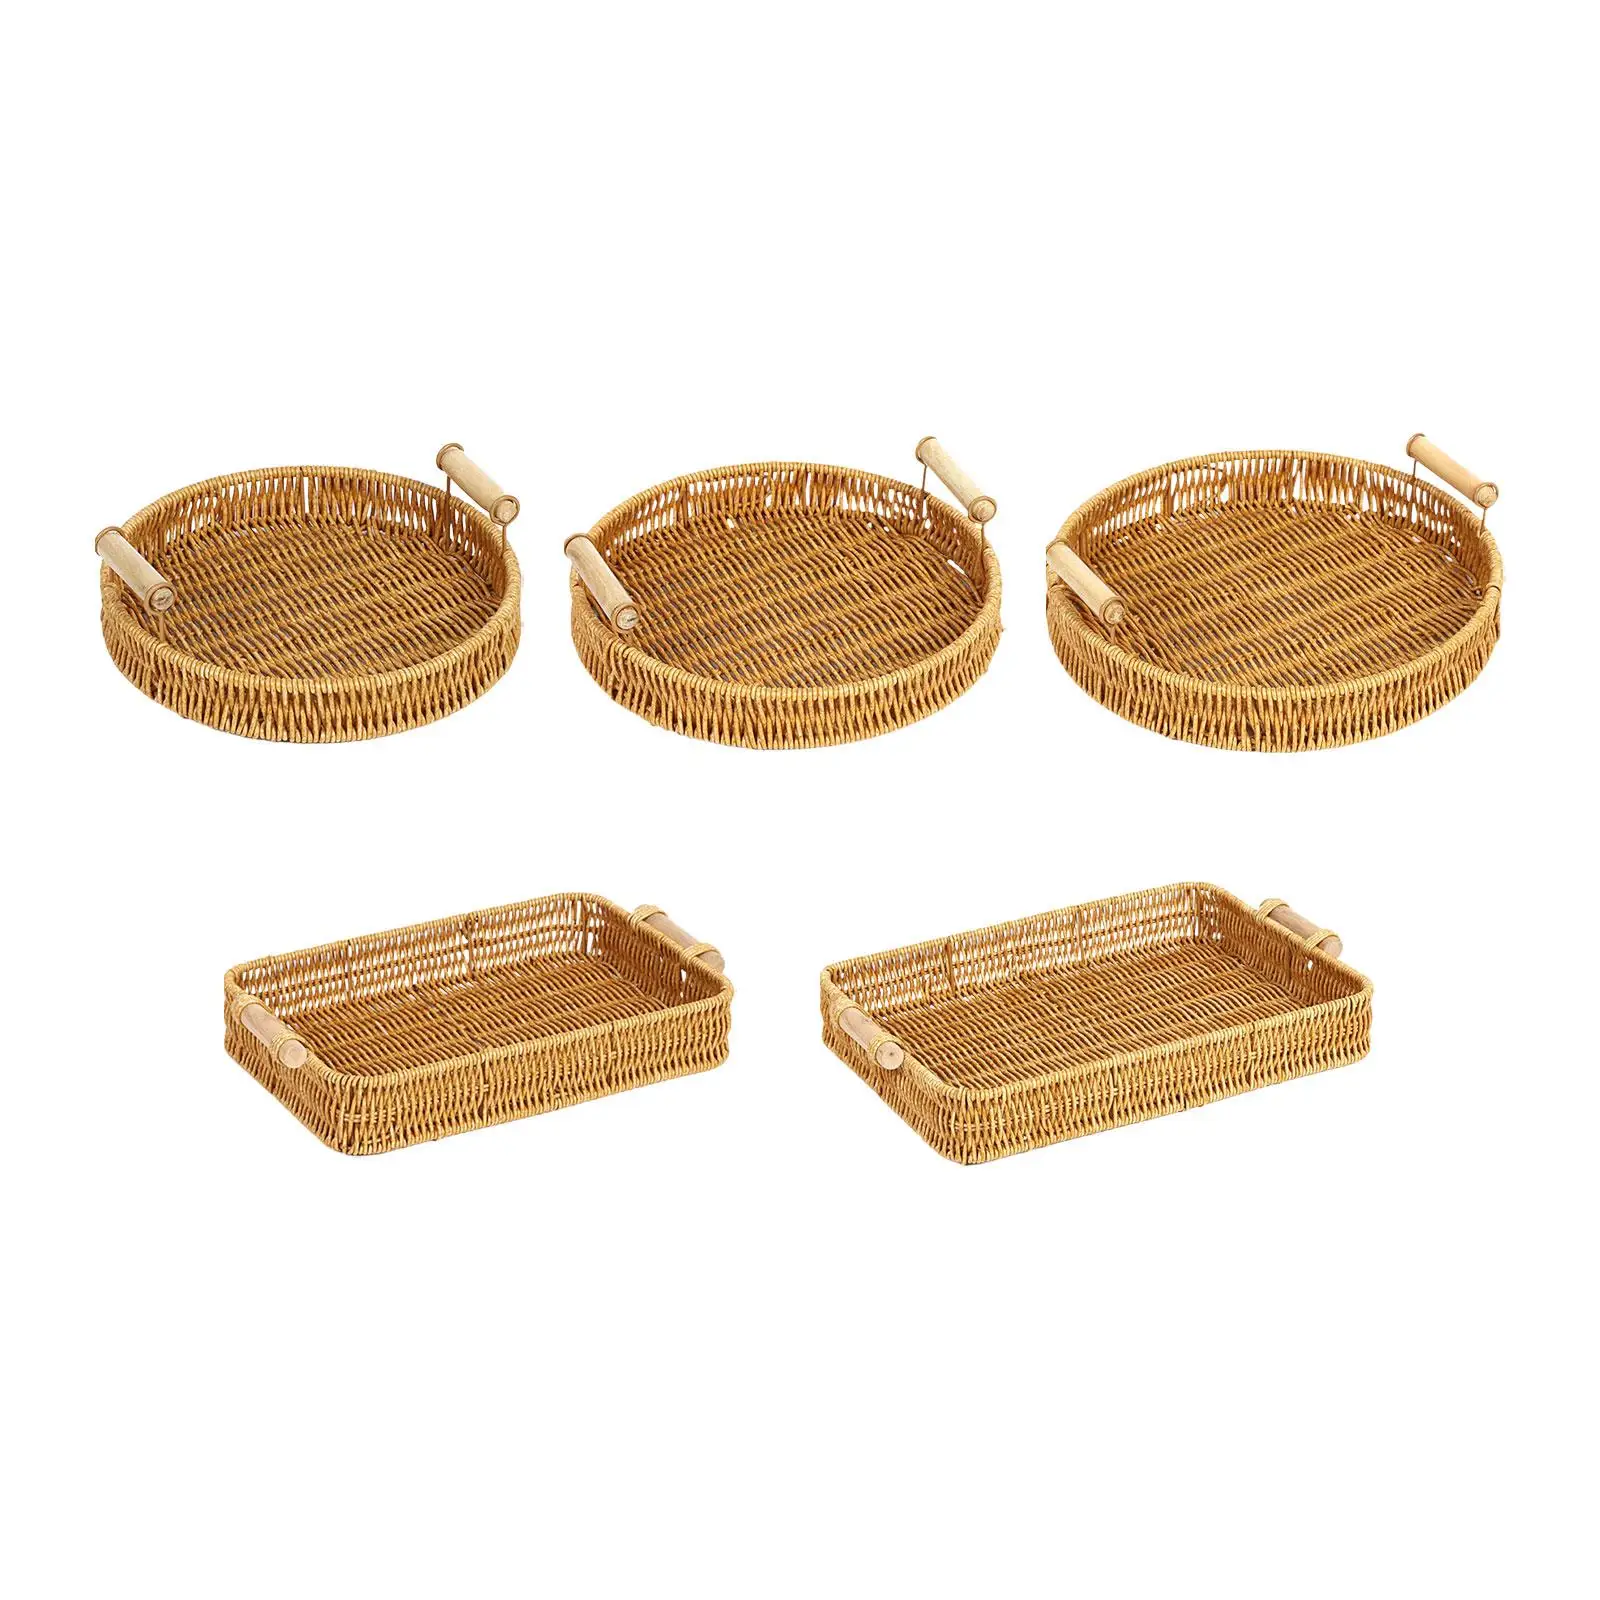 Food Serving Baskets Coffee Table Decor Snack Serving Bowl Food Organizer Tray for Camping Bedroom Party Living Room Picnic